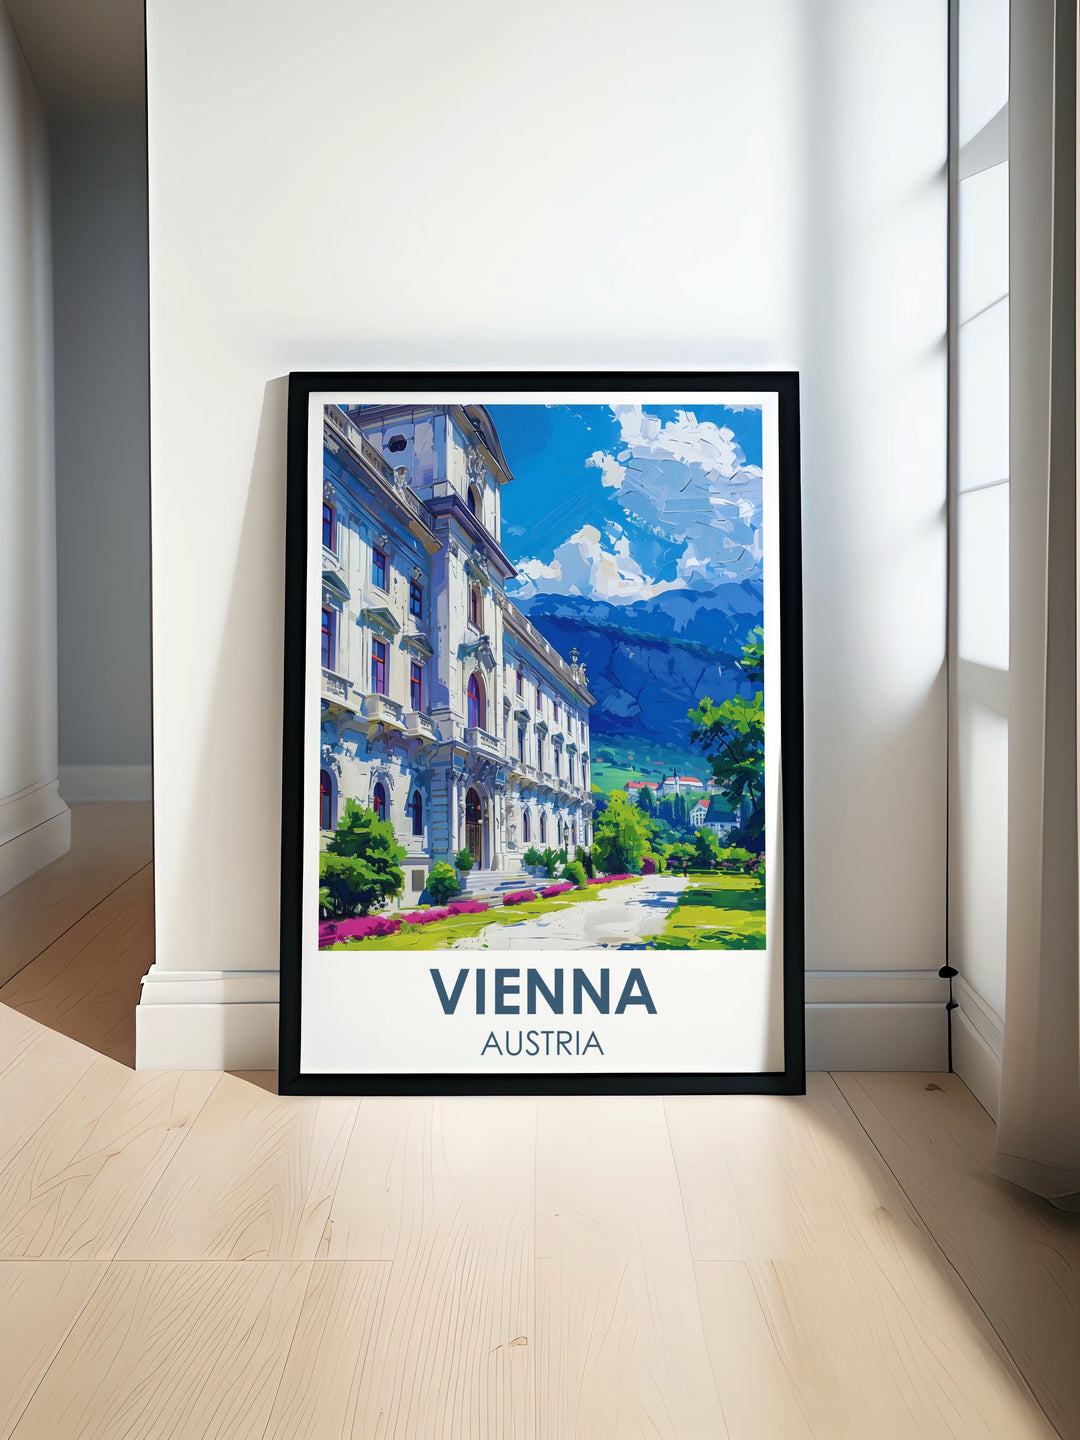 Vienna Print featuring the stunning Belvedere Palace showcasing its majestic architecture and lush gardens perfect for adding a touch of elegance to your home decor an ideal gift for lovers of Vienna and Austrian culture